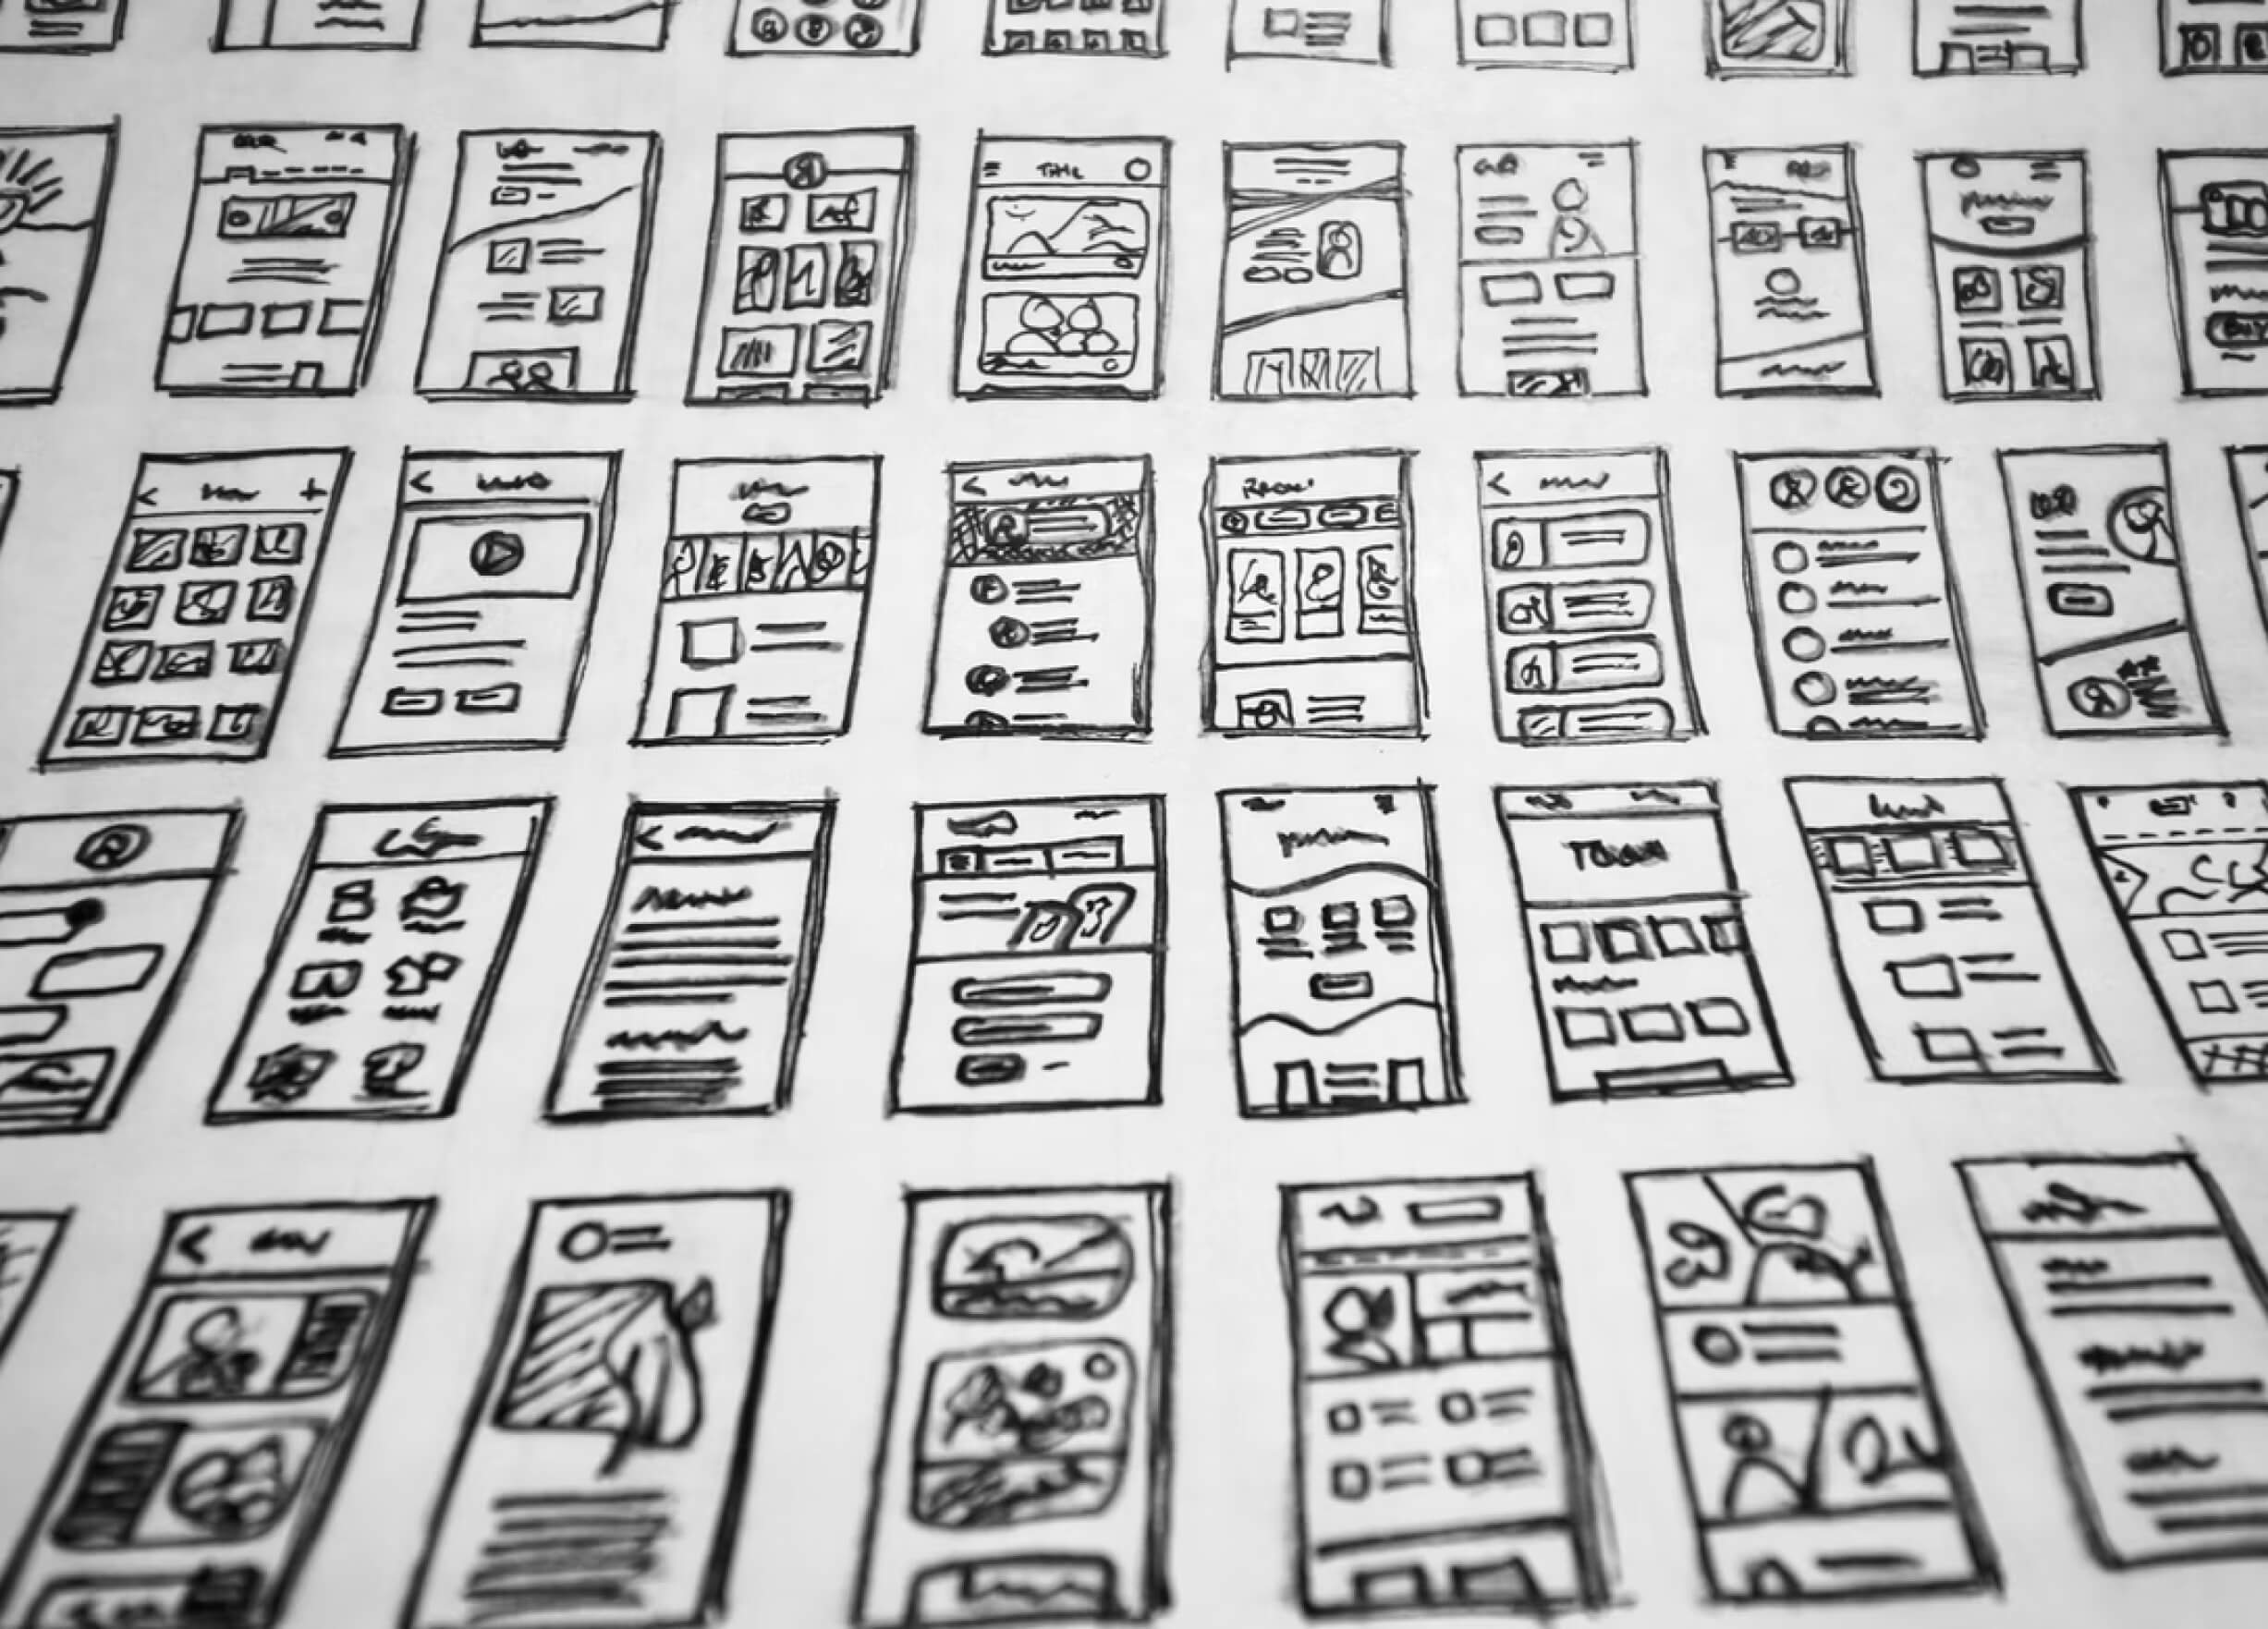 Many hand drawn wireframes on a white paper